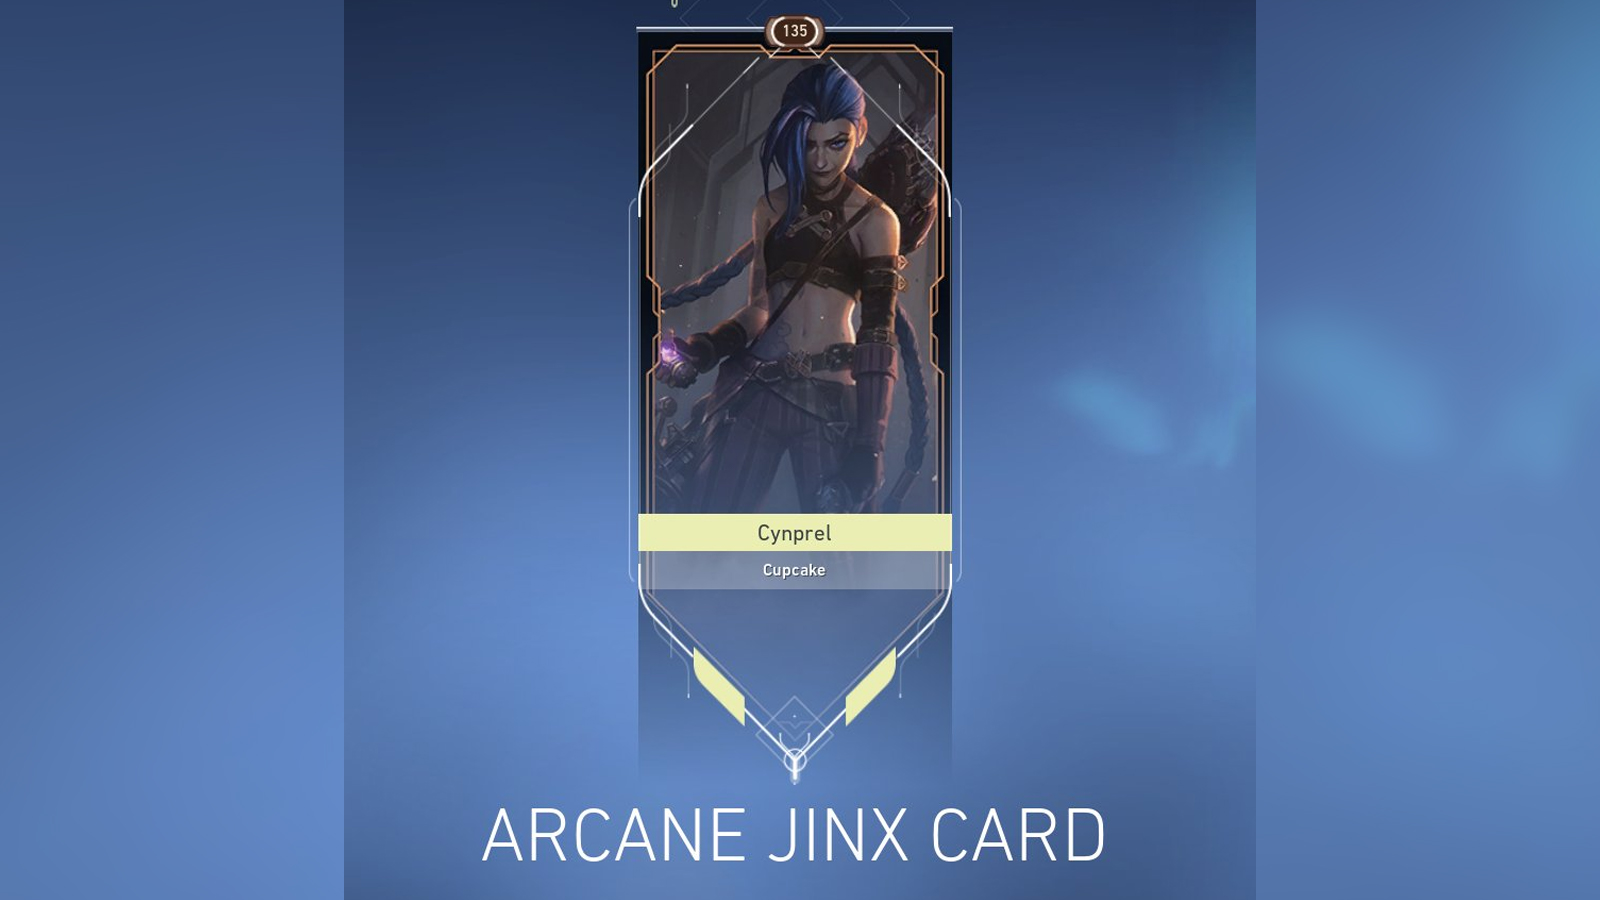 How to get a free Arcane Jinx player card in Valorant